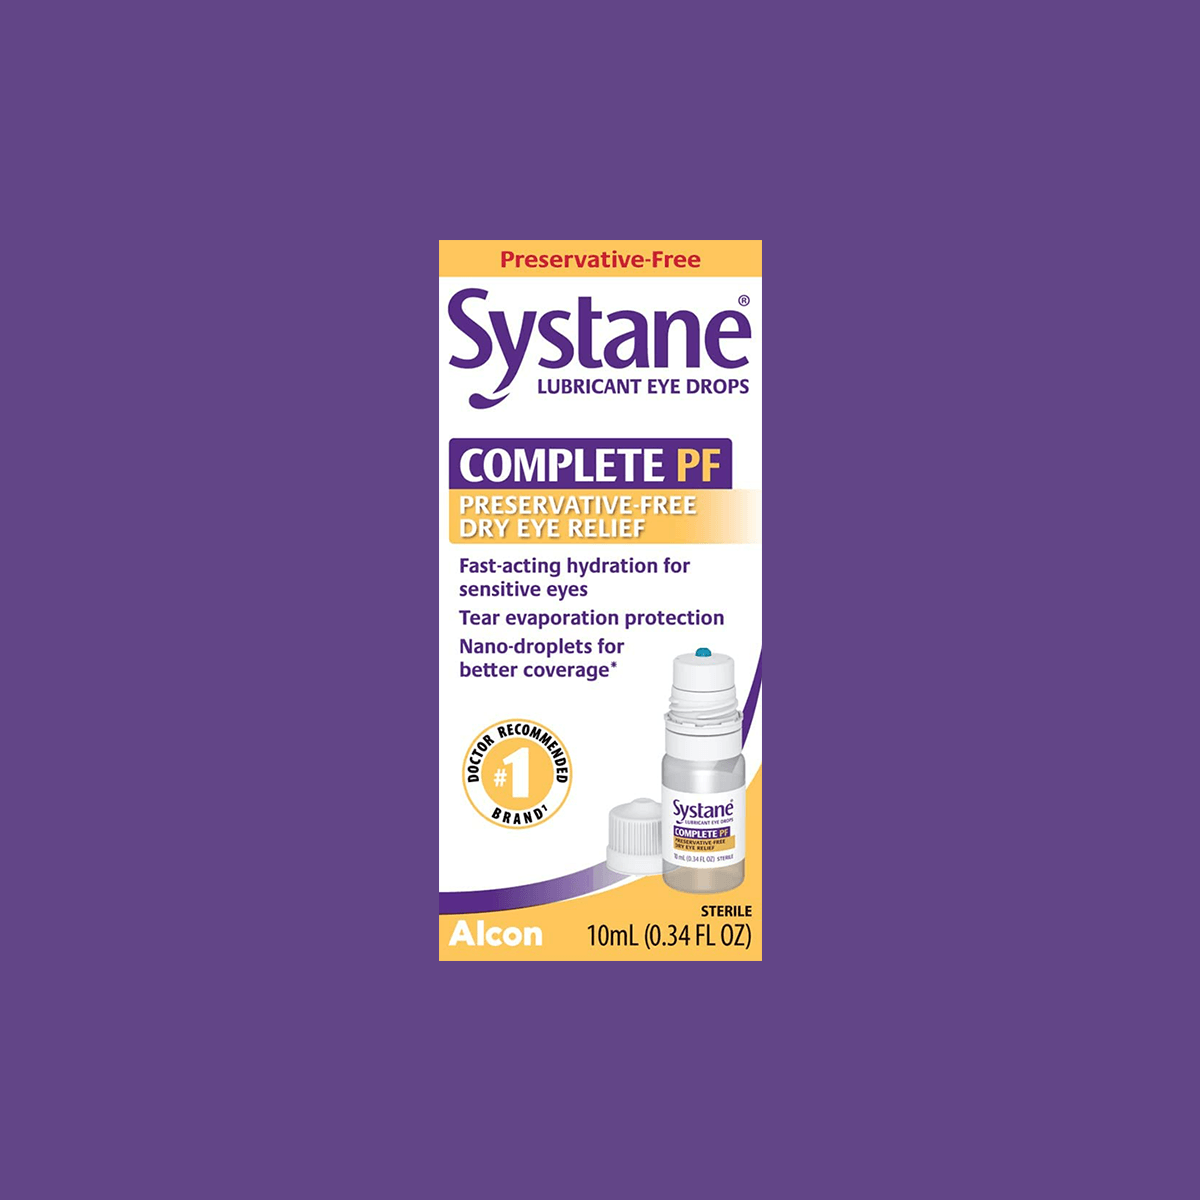 Systane COMPLETE Preservative-Free Eye Drops Multi-Dose Bottle (2 Sizes) - Dryeye Rescue